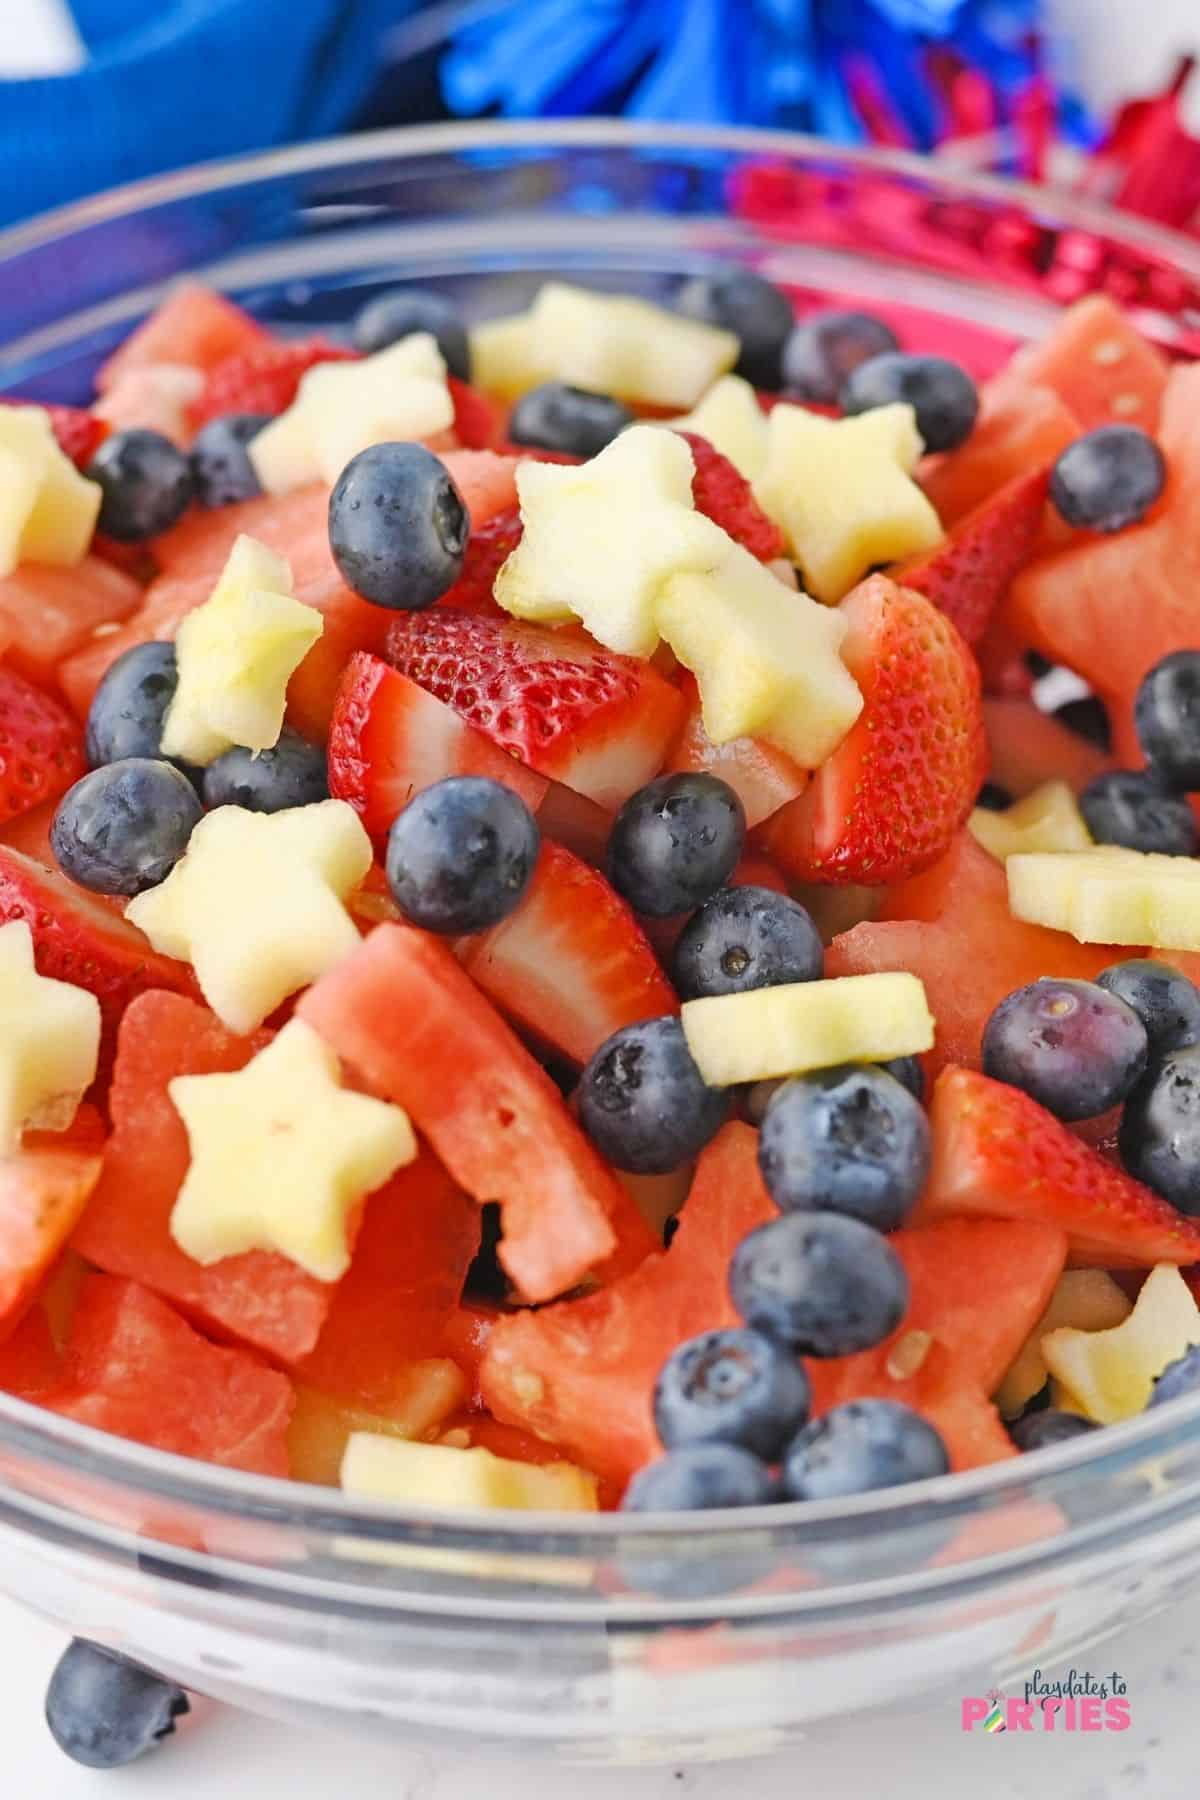 Looking closely at the July 4th fruit salad, the white apple stars pop against the red and blue fruits.